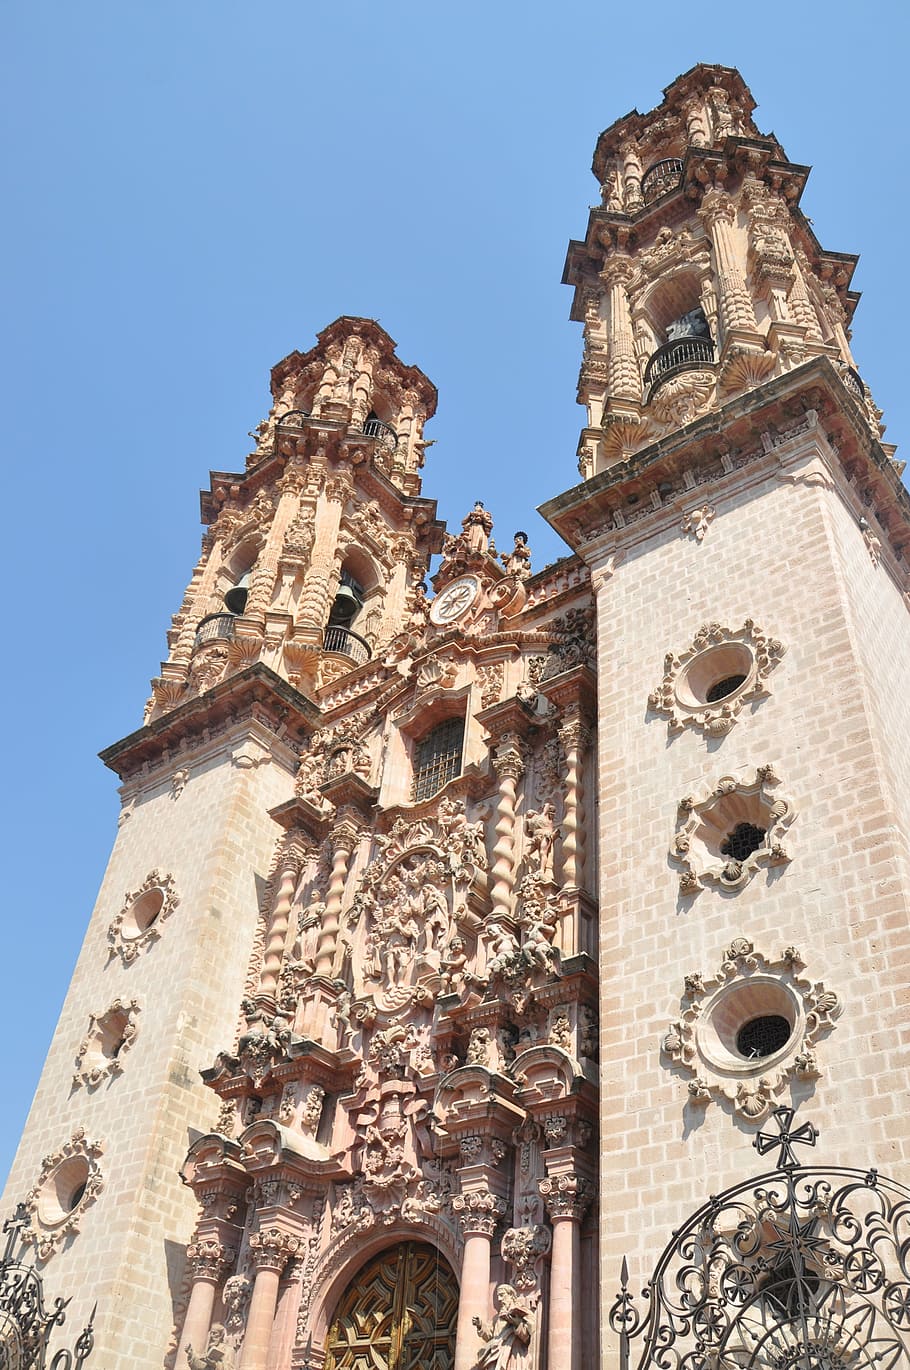 cathedral, mexico, church, architecture, temple, culture, cathedral mexico, tourism, facade, colonial architecture